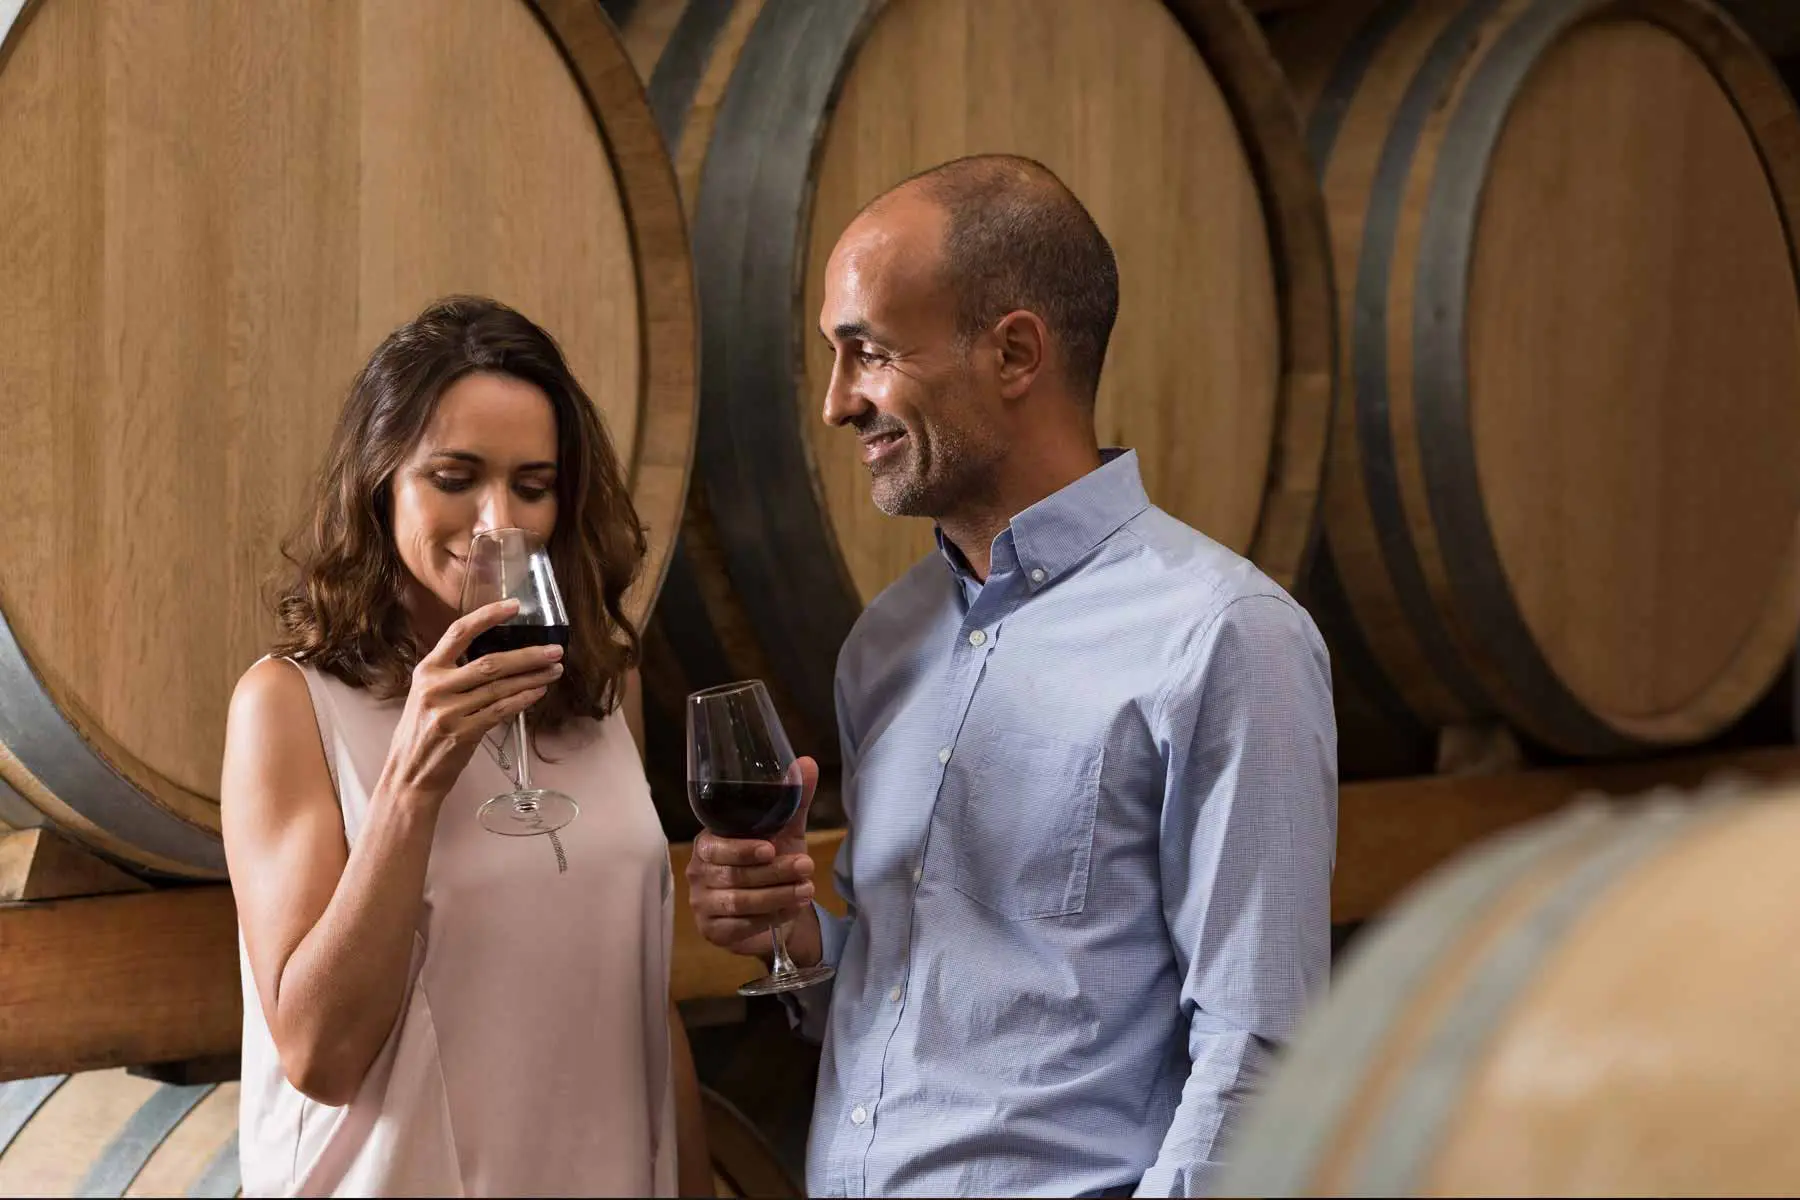 man-and-woman-winery-1